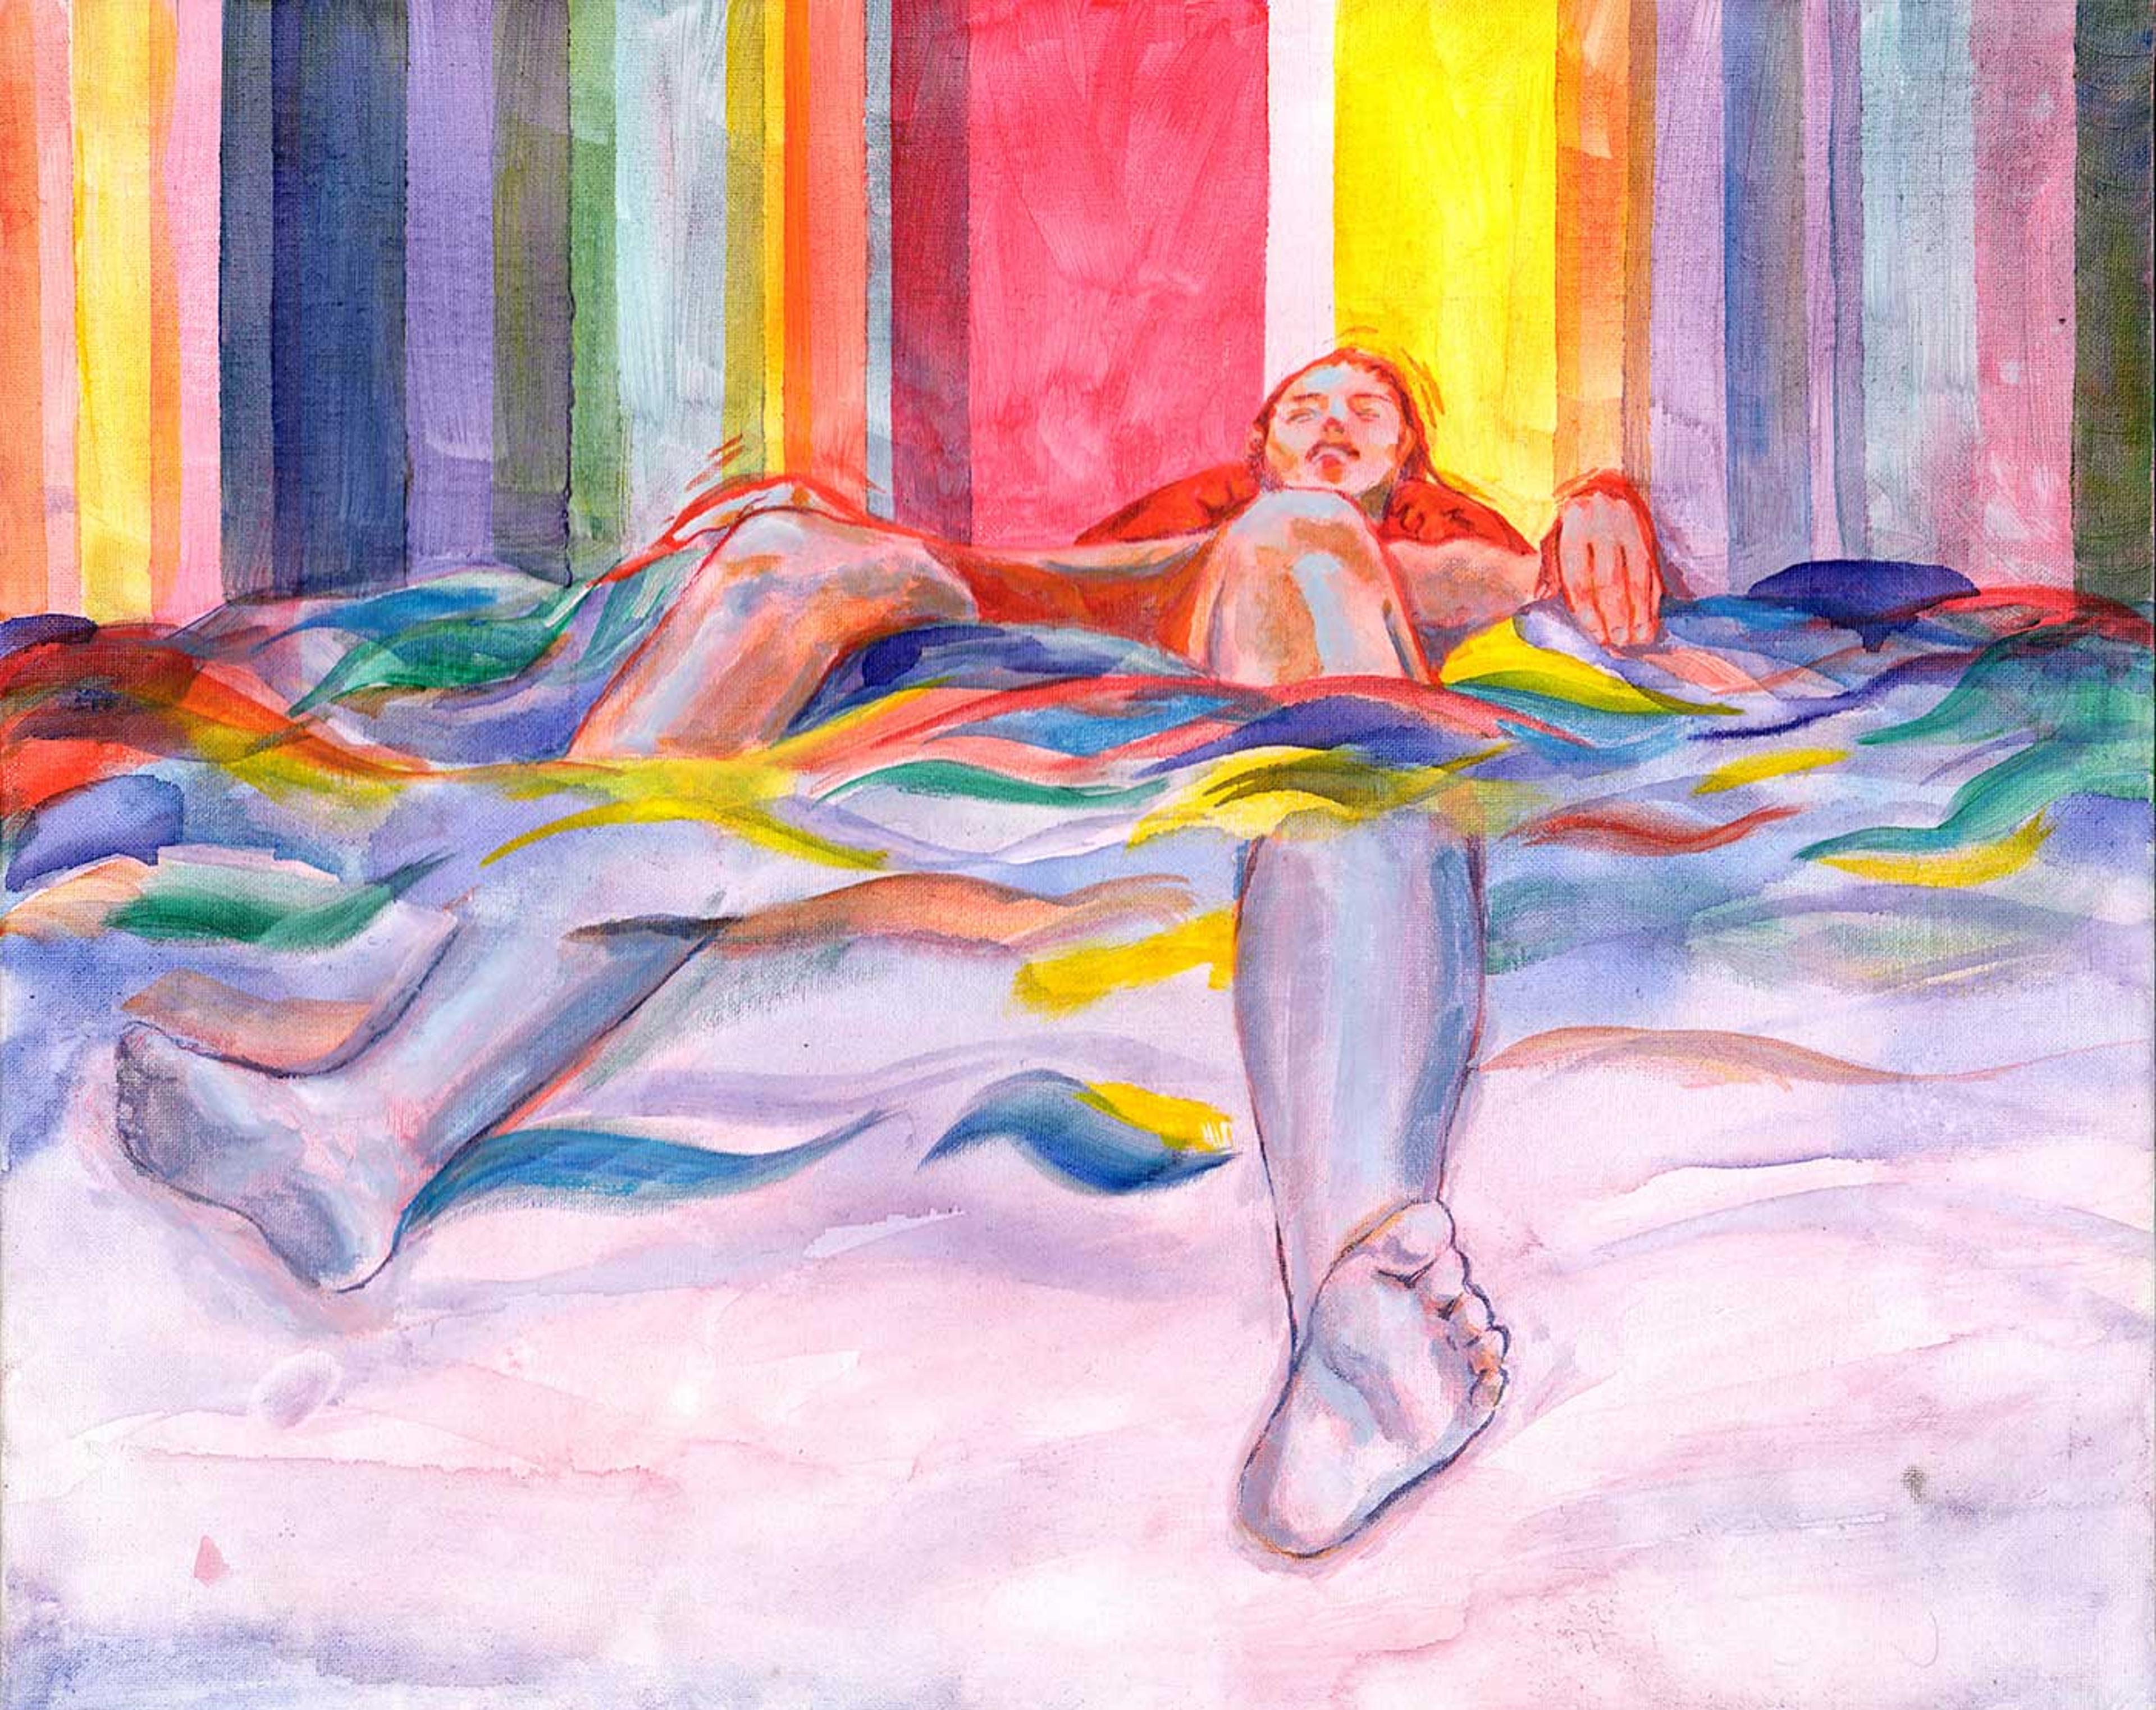 Painting of a figure in a relaxed pose surrounded by rainbow colors.